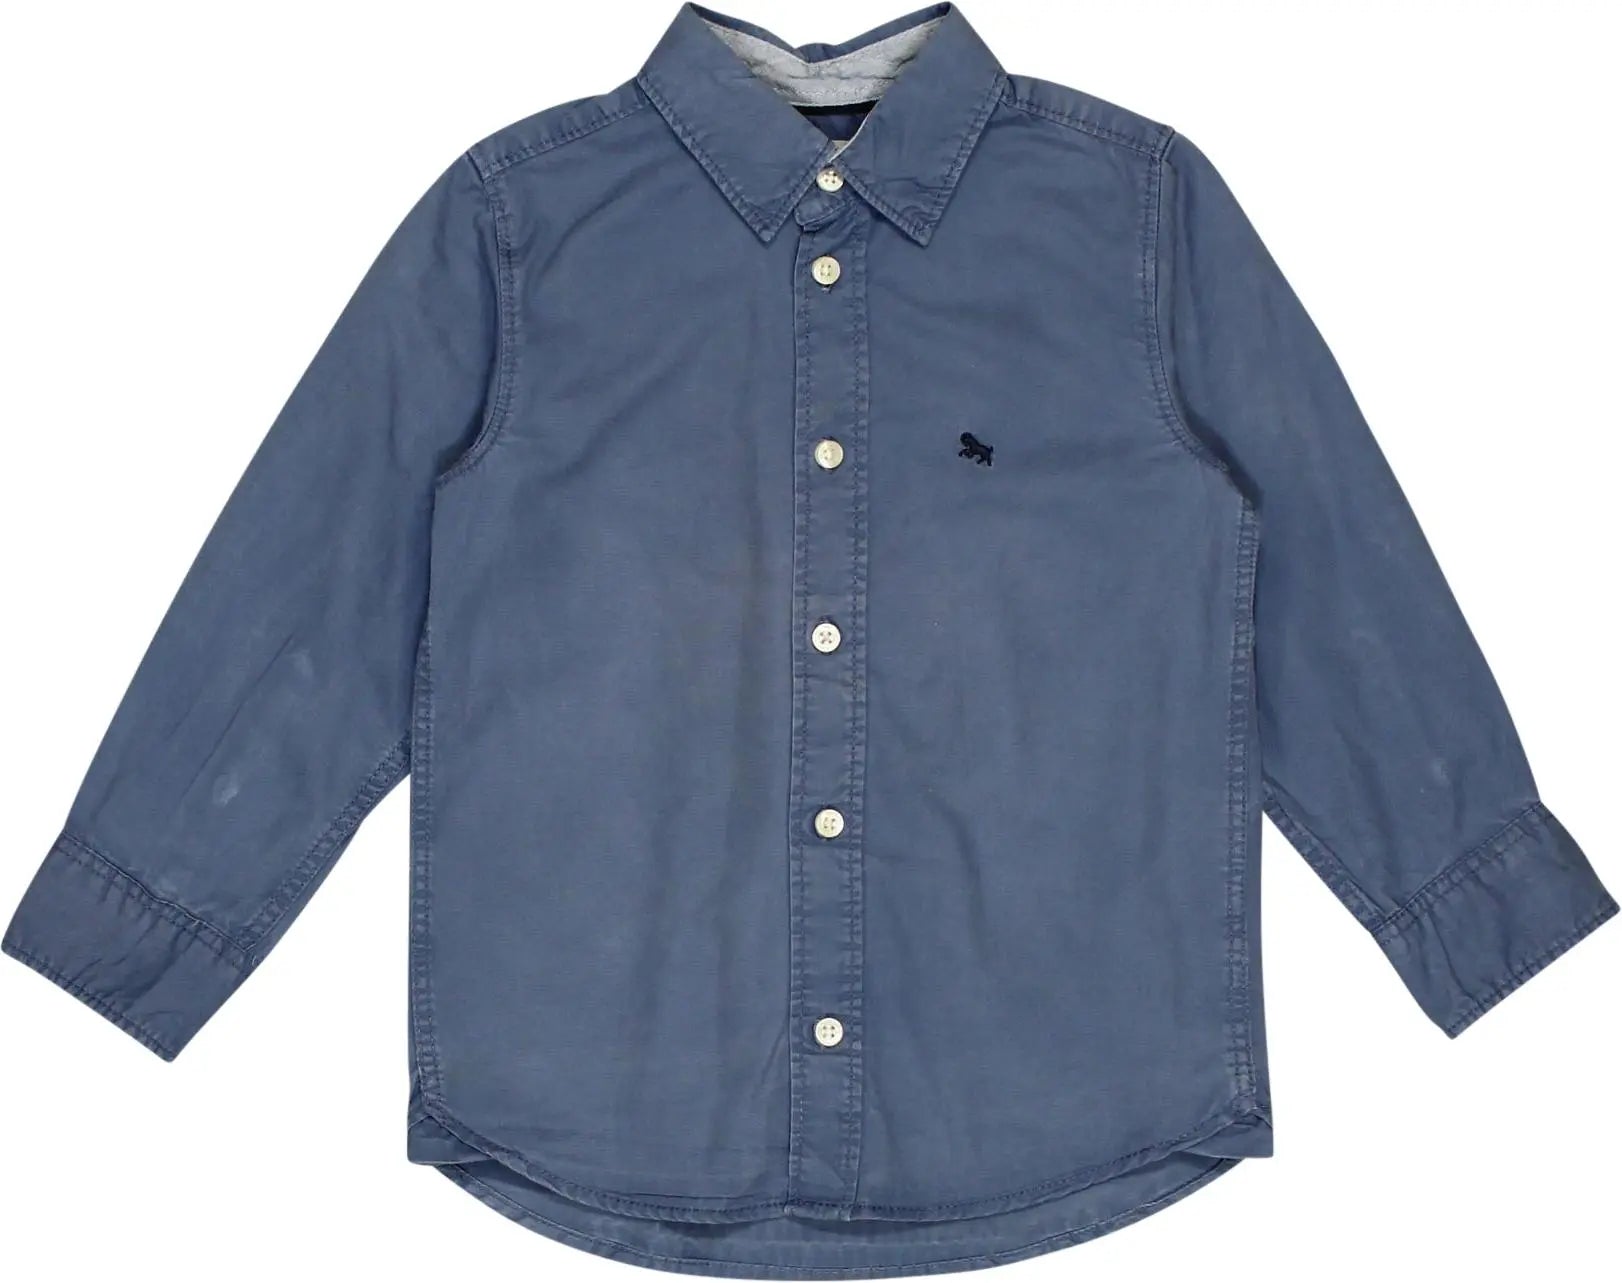 H&M - Blue Shirt- ThriftTale.com - Vintage and second handclothing